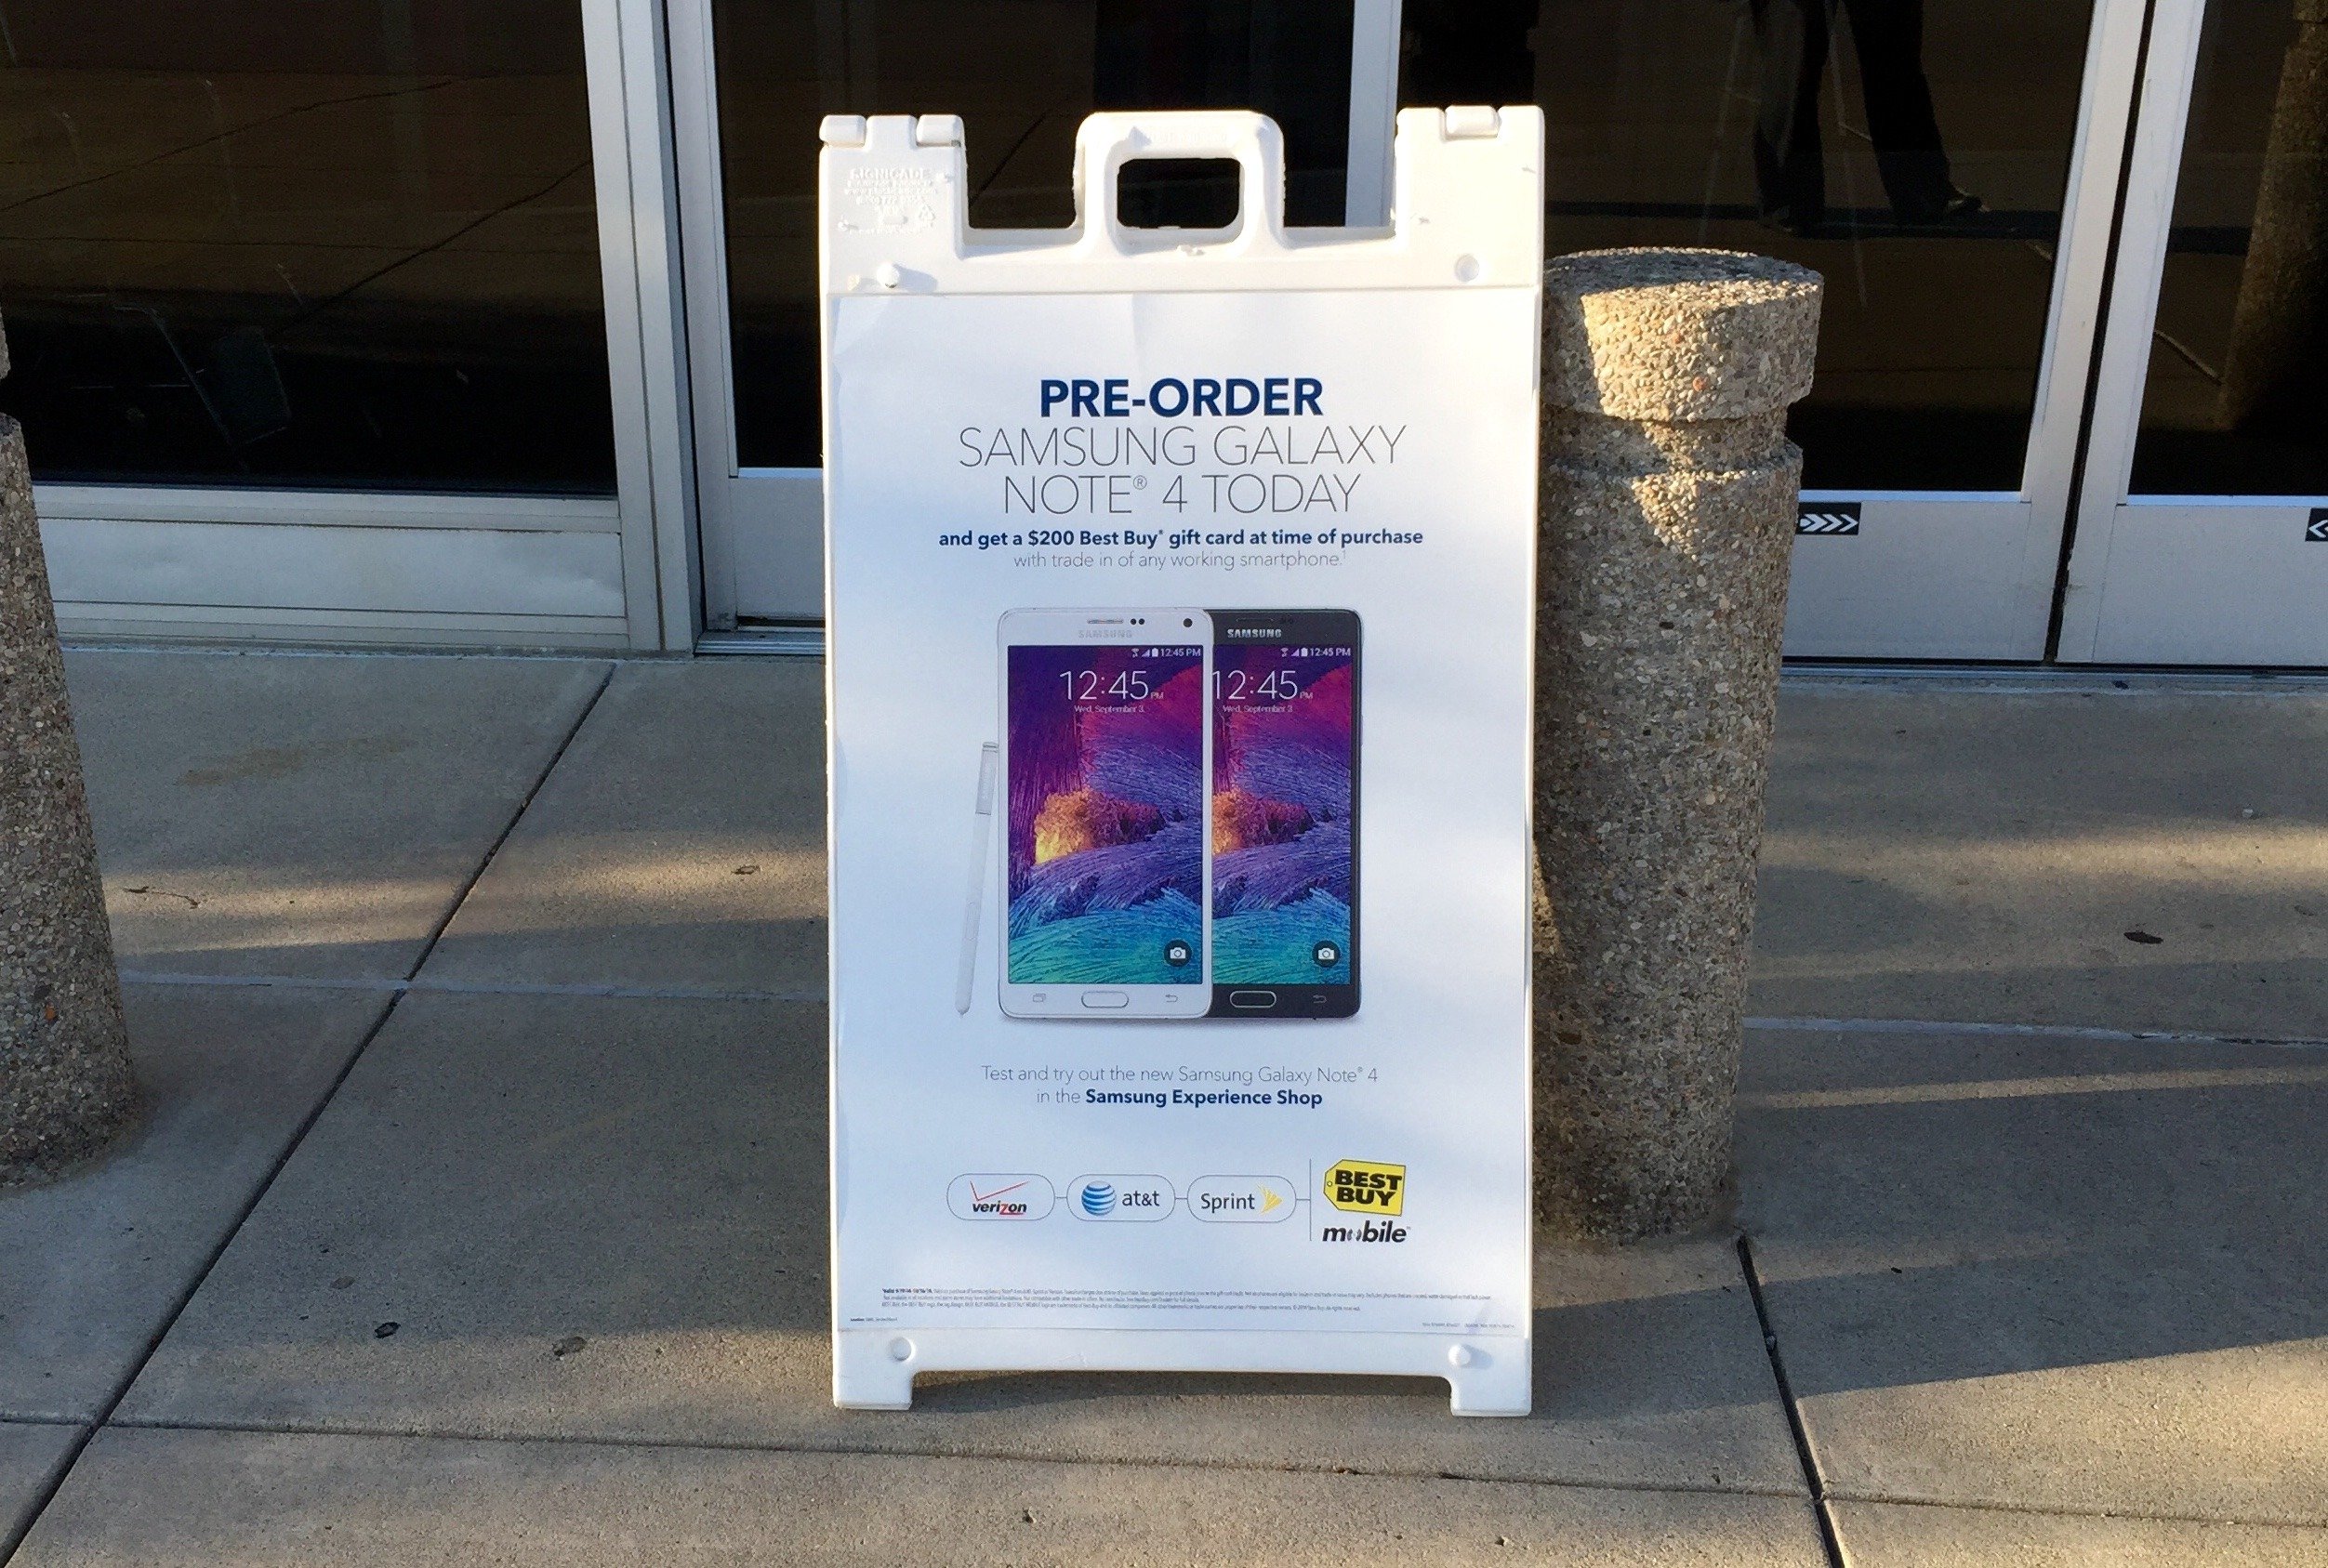 Look for a major Galaxy Note 5 release date trade in offer.